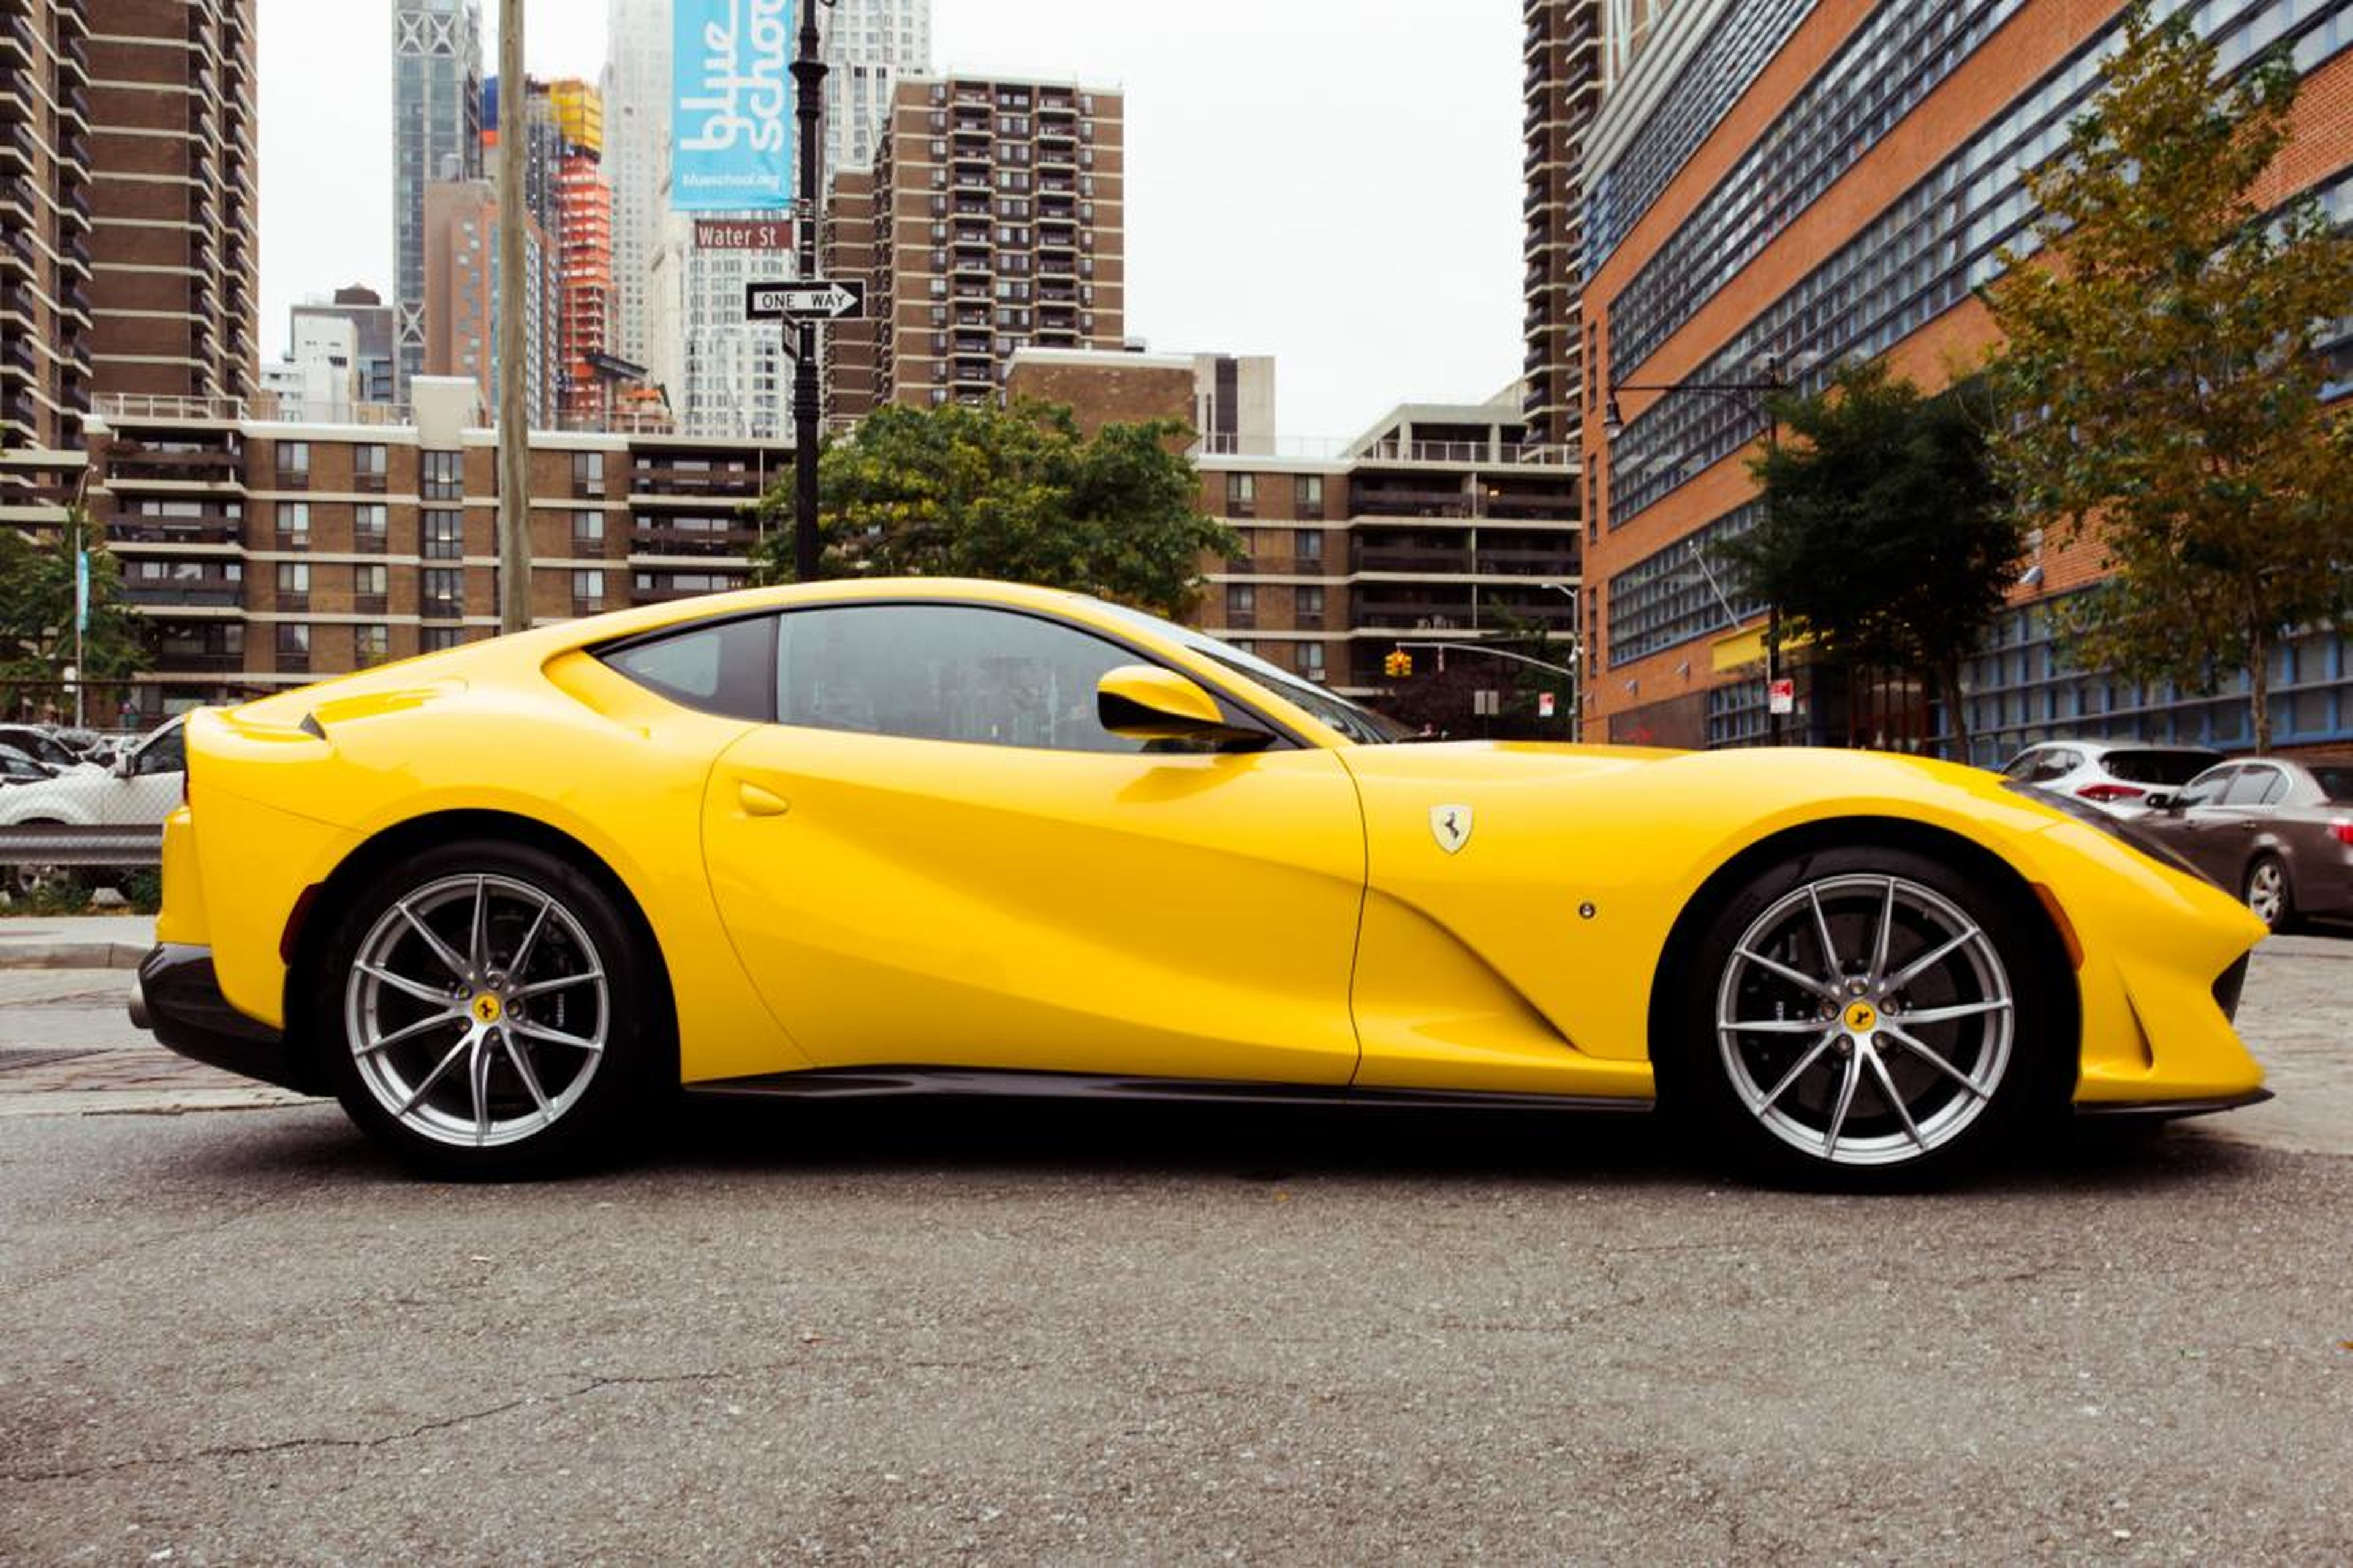 Since the IPO, the company's market cap has risen to $30 billion, thanks to big-ticket cars such as the 812 Superfast.